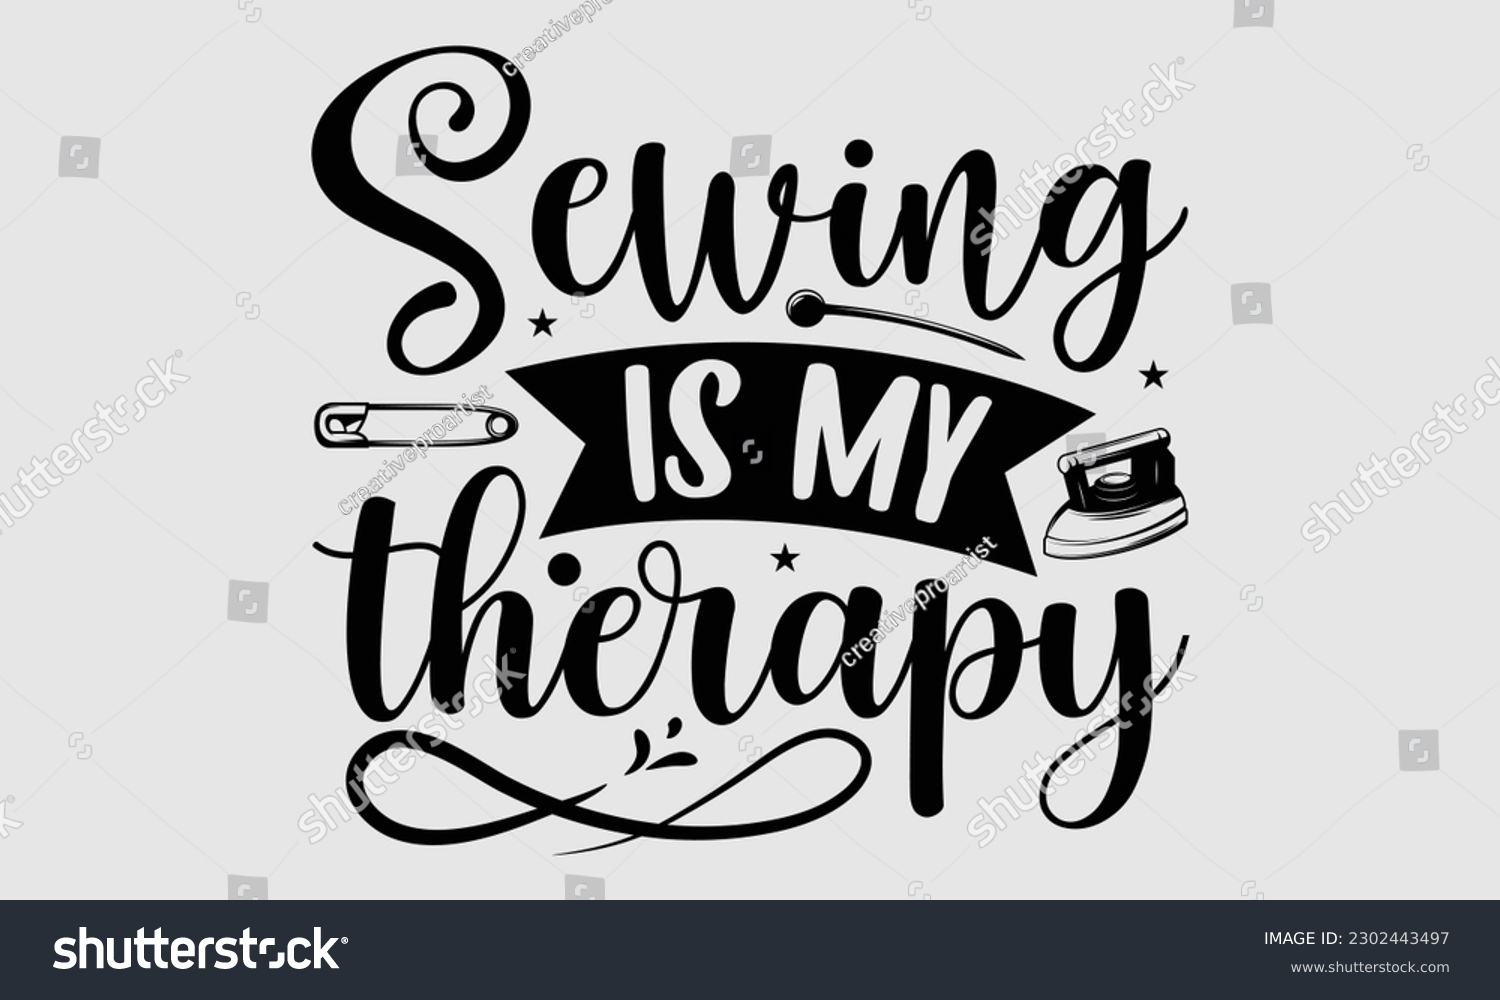 SVG of Sewing is my therapy- Sewing t- shirt design, Hand drawn vintage illustration for prints on eps, svg Files for Cutting, greeting card template with typography text svg